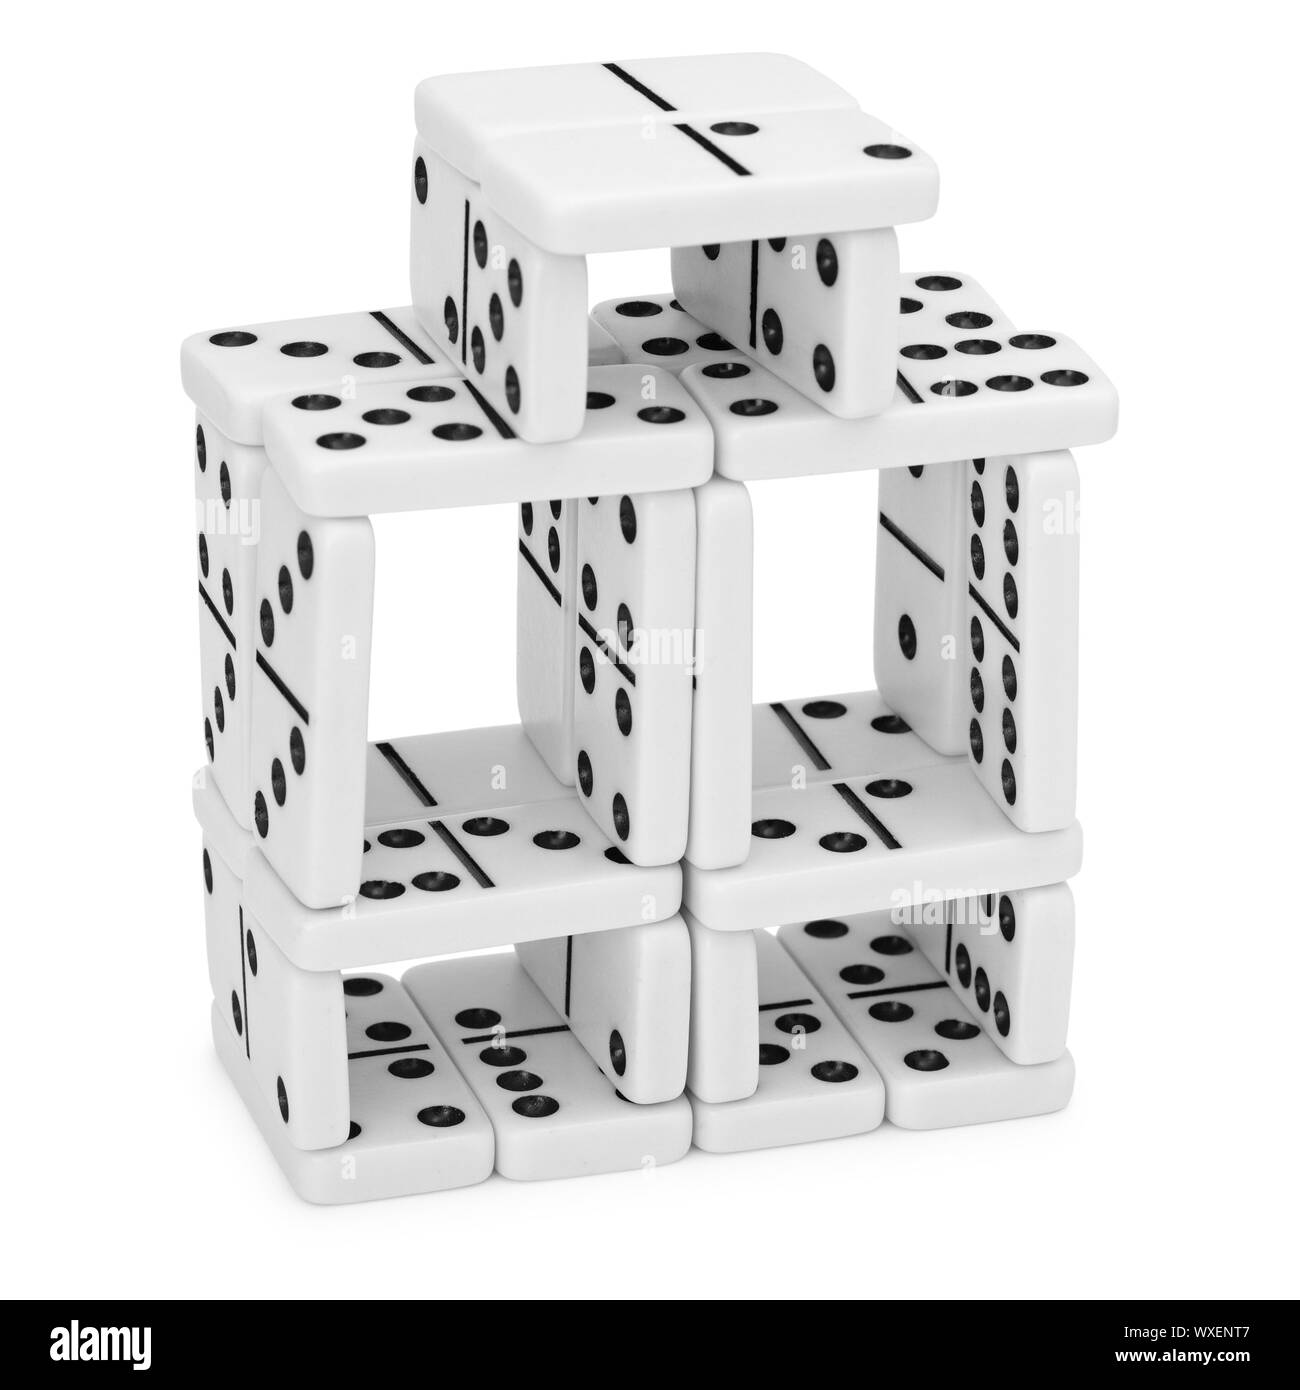 Intricate construction of dominoes on a white background Stock Photo